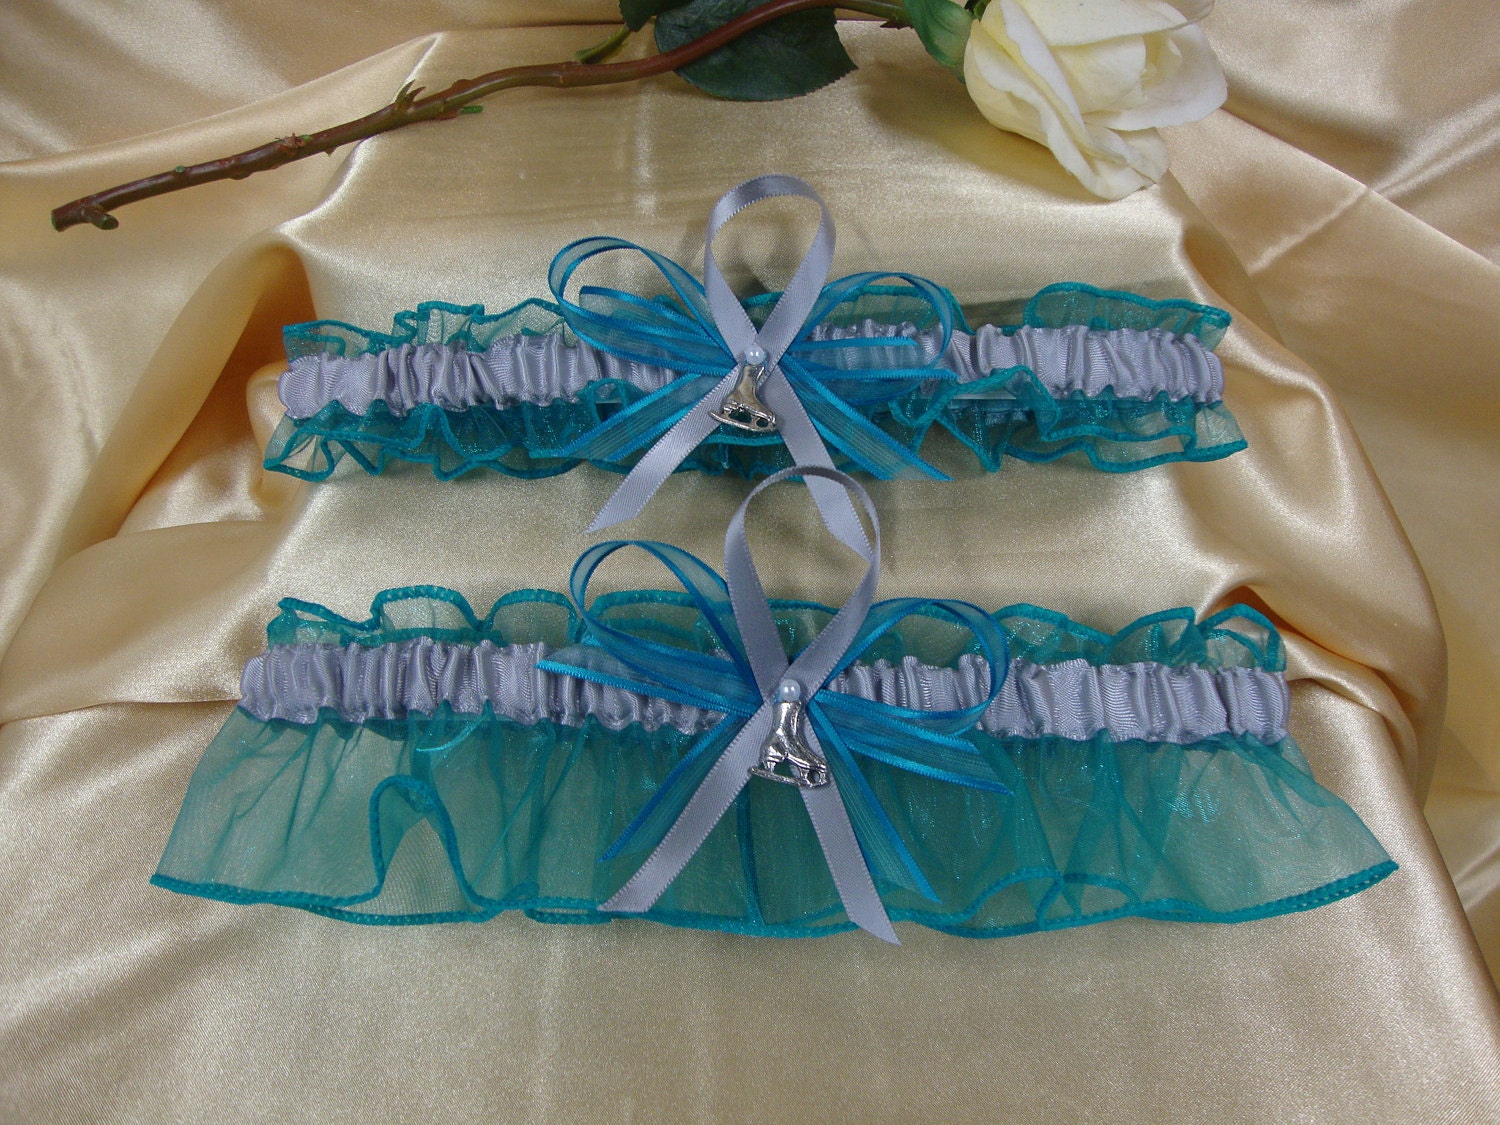 Teal and Silver Wedding Garter Set with Figure Skate Charms From StarBridal